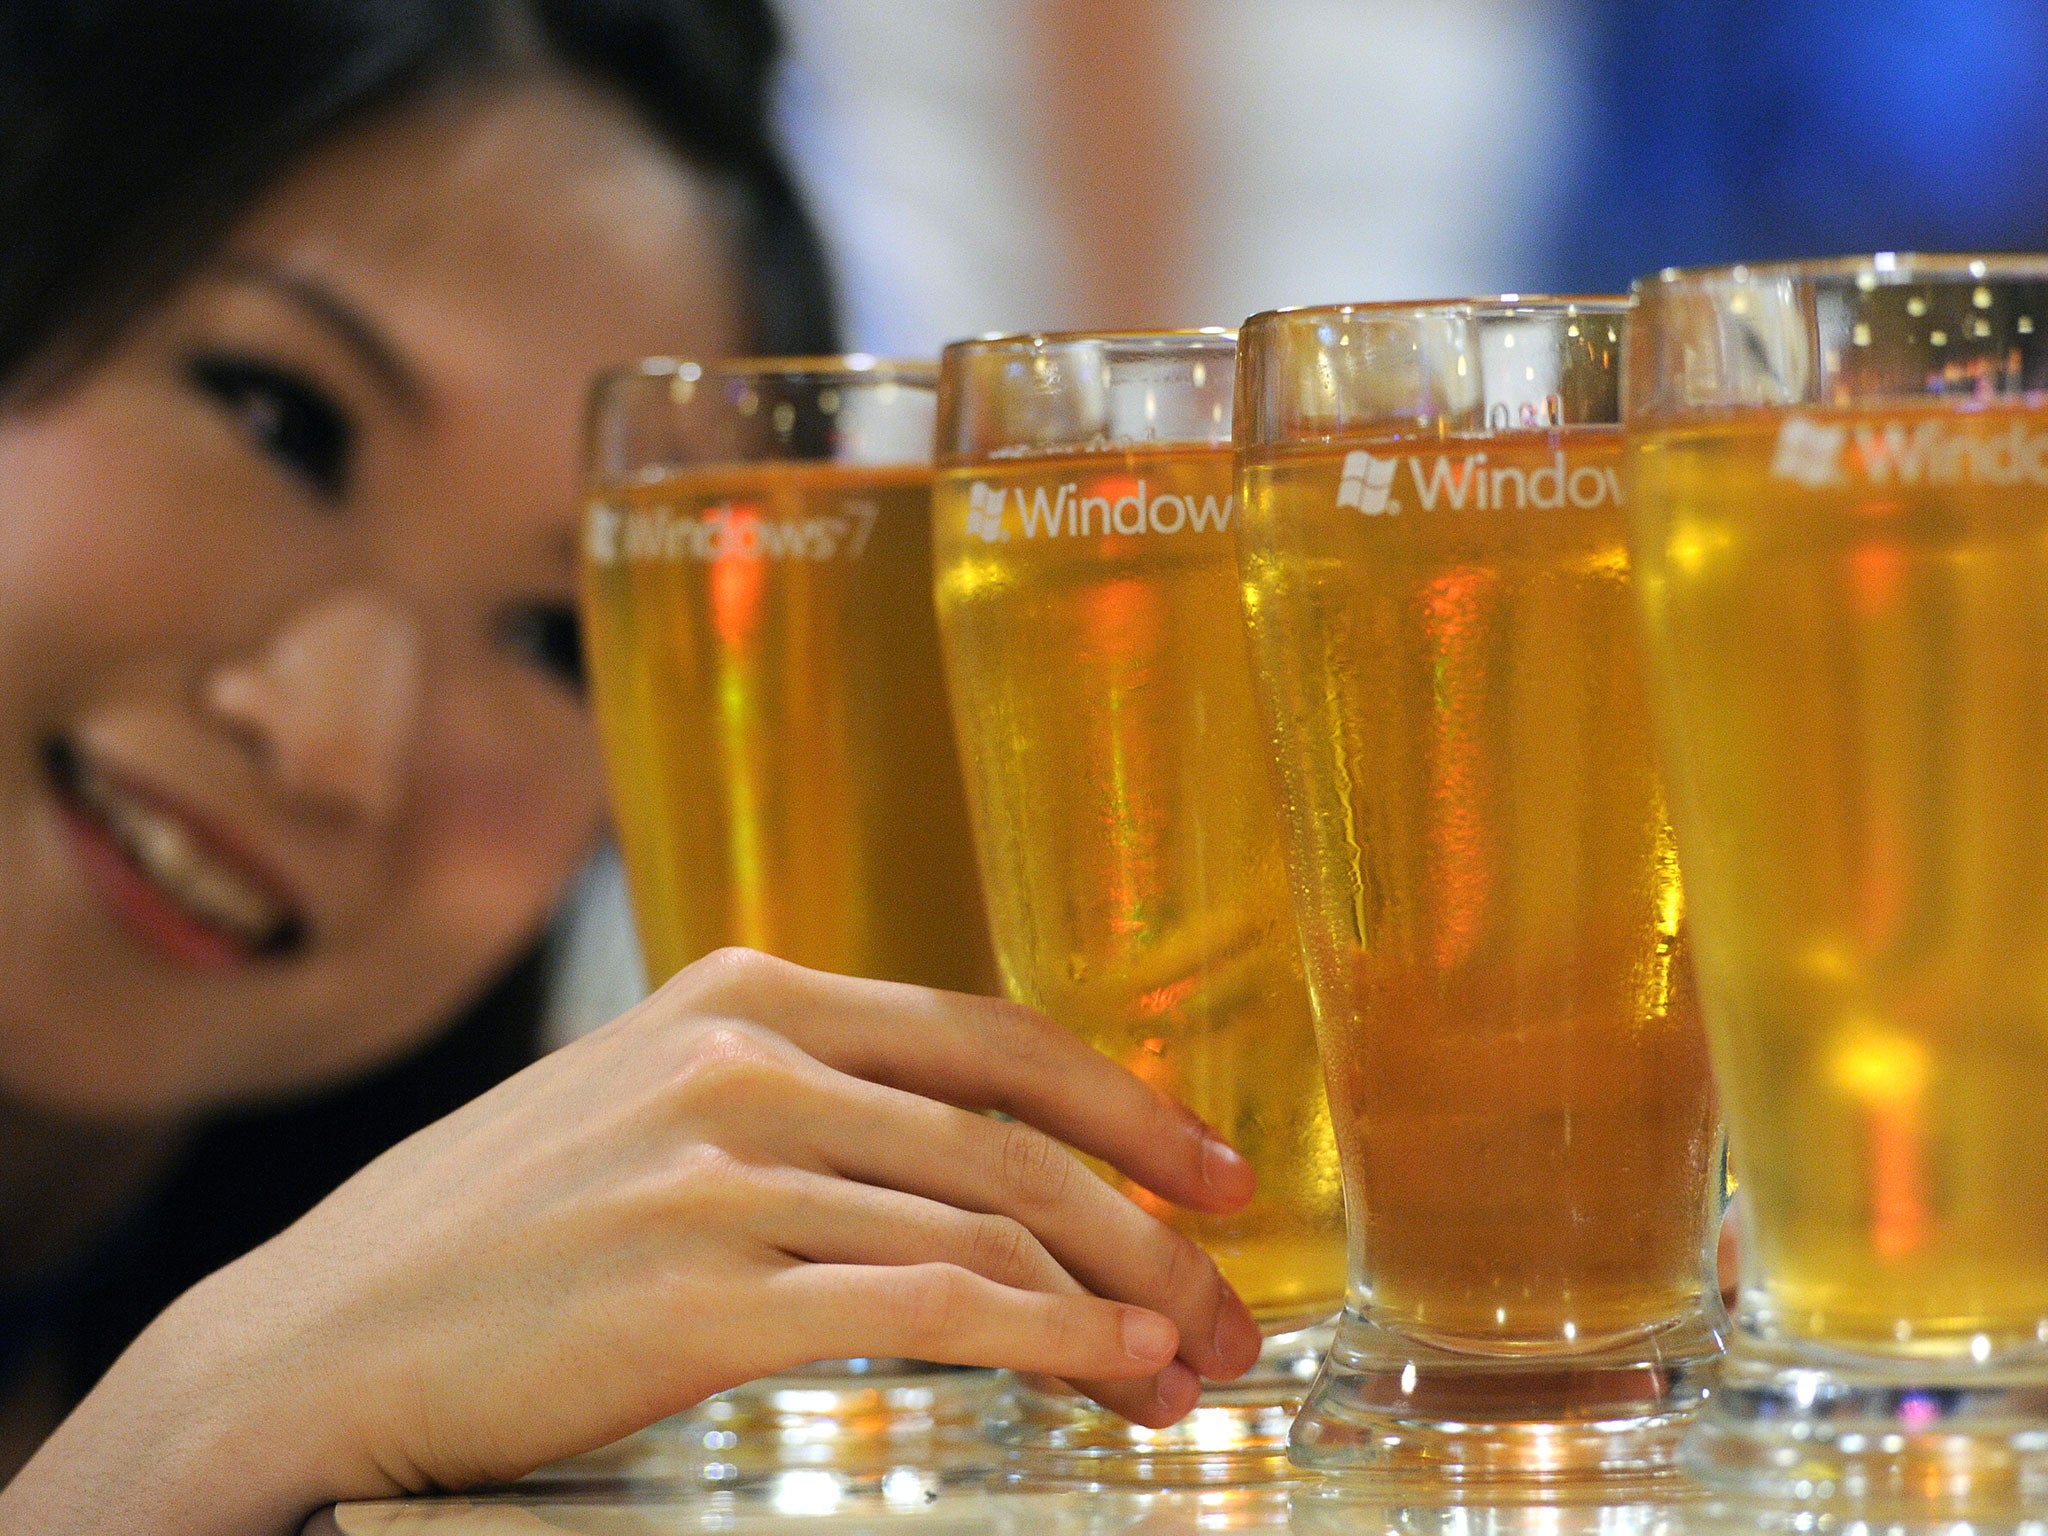 Glasses of beer at a restaurant promotion in Taipei, Taiwan